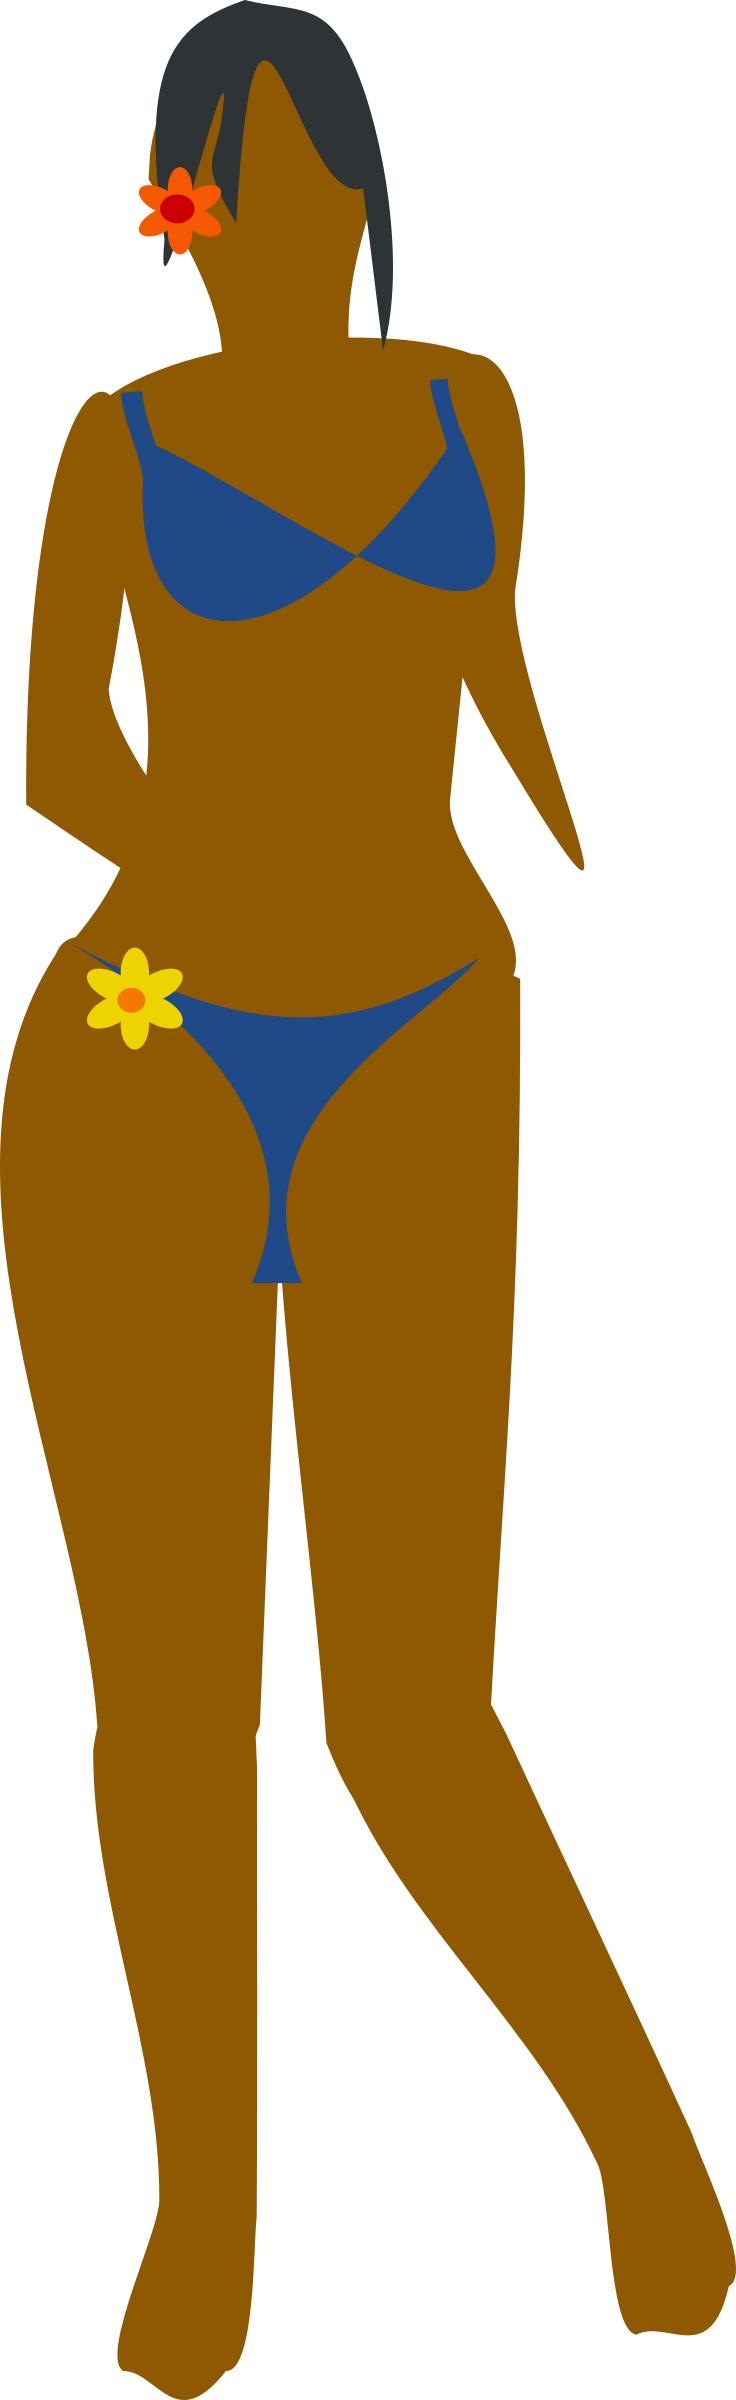 Sunny woman png